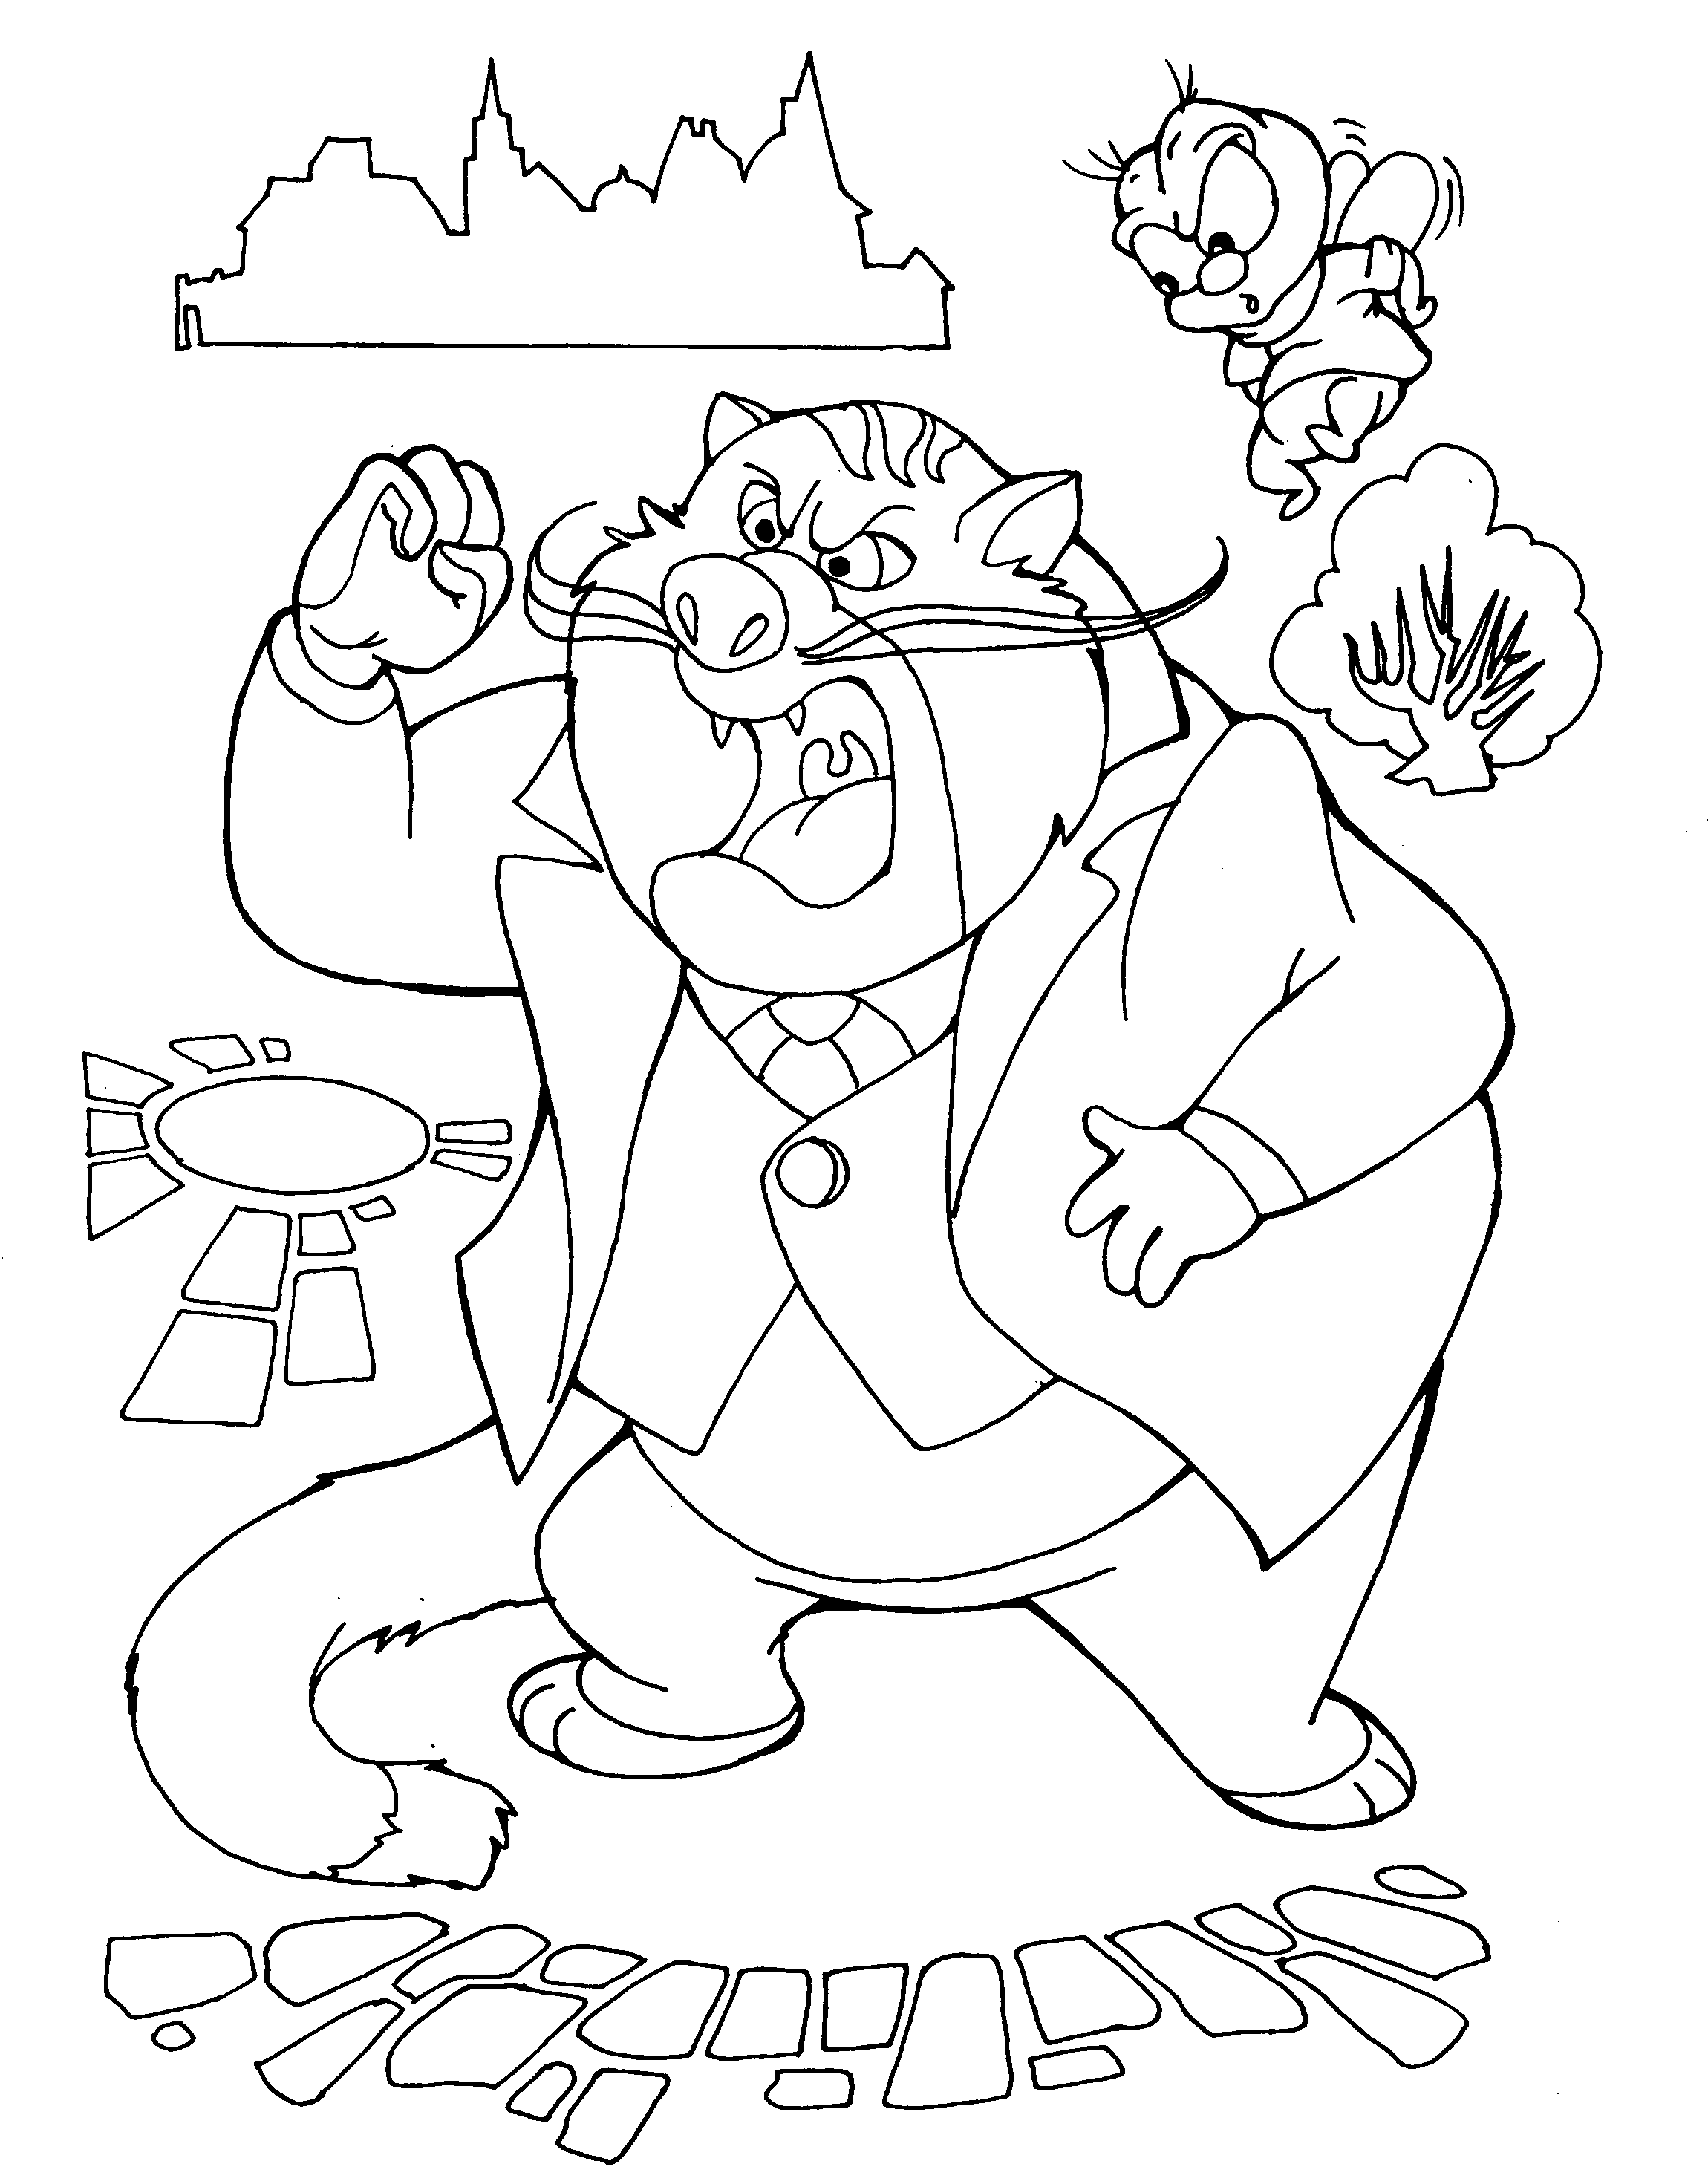 Coloring page - Fat Cat and Zipper